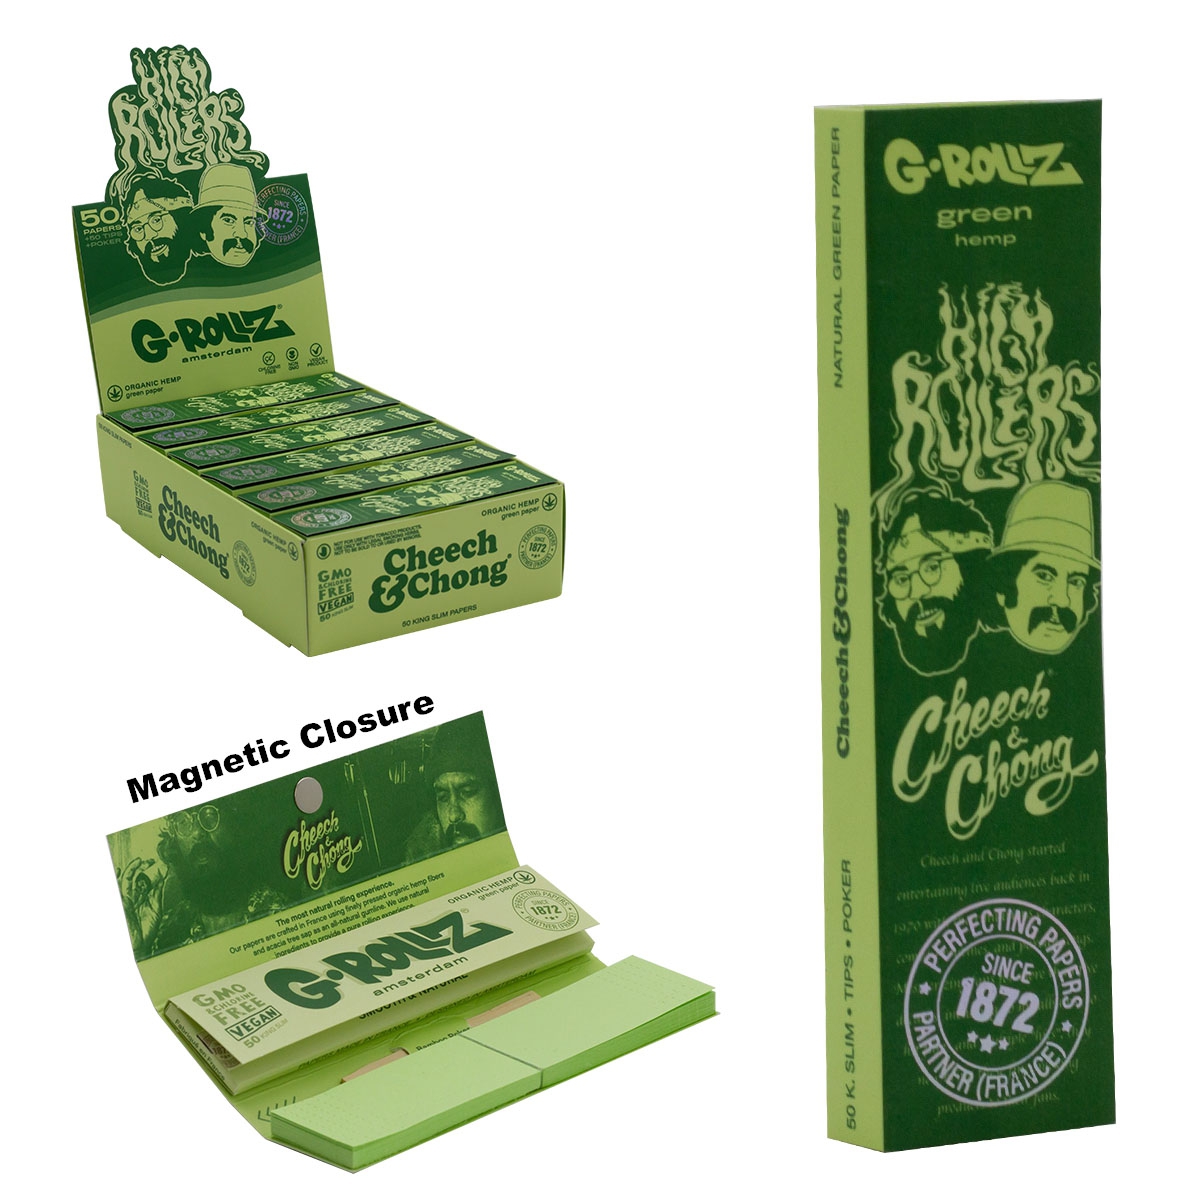 G-Rollz, Collector 'Colossal Dream' Pink - 50 KS Slim Papers + Tips (24  Booklets Display), Rolling Papers, G-ROLLZ